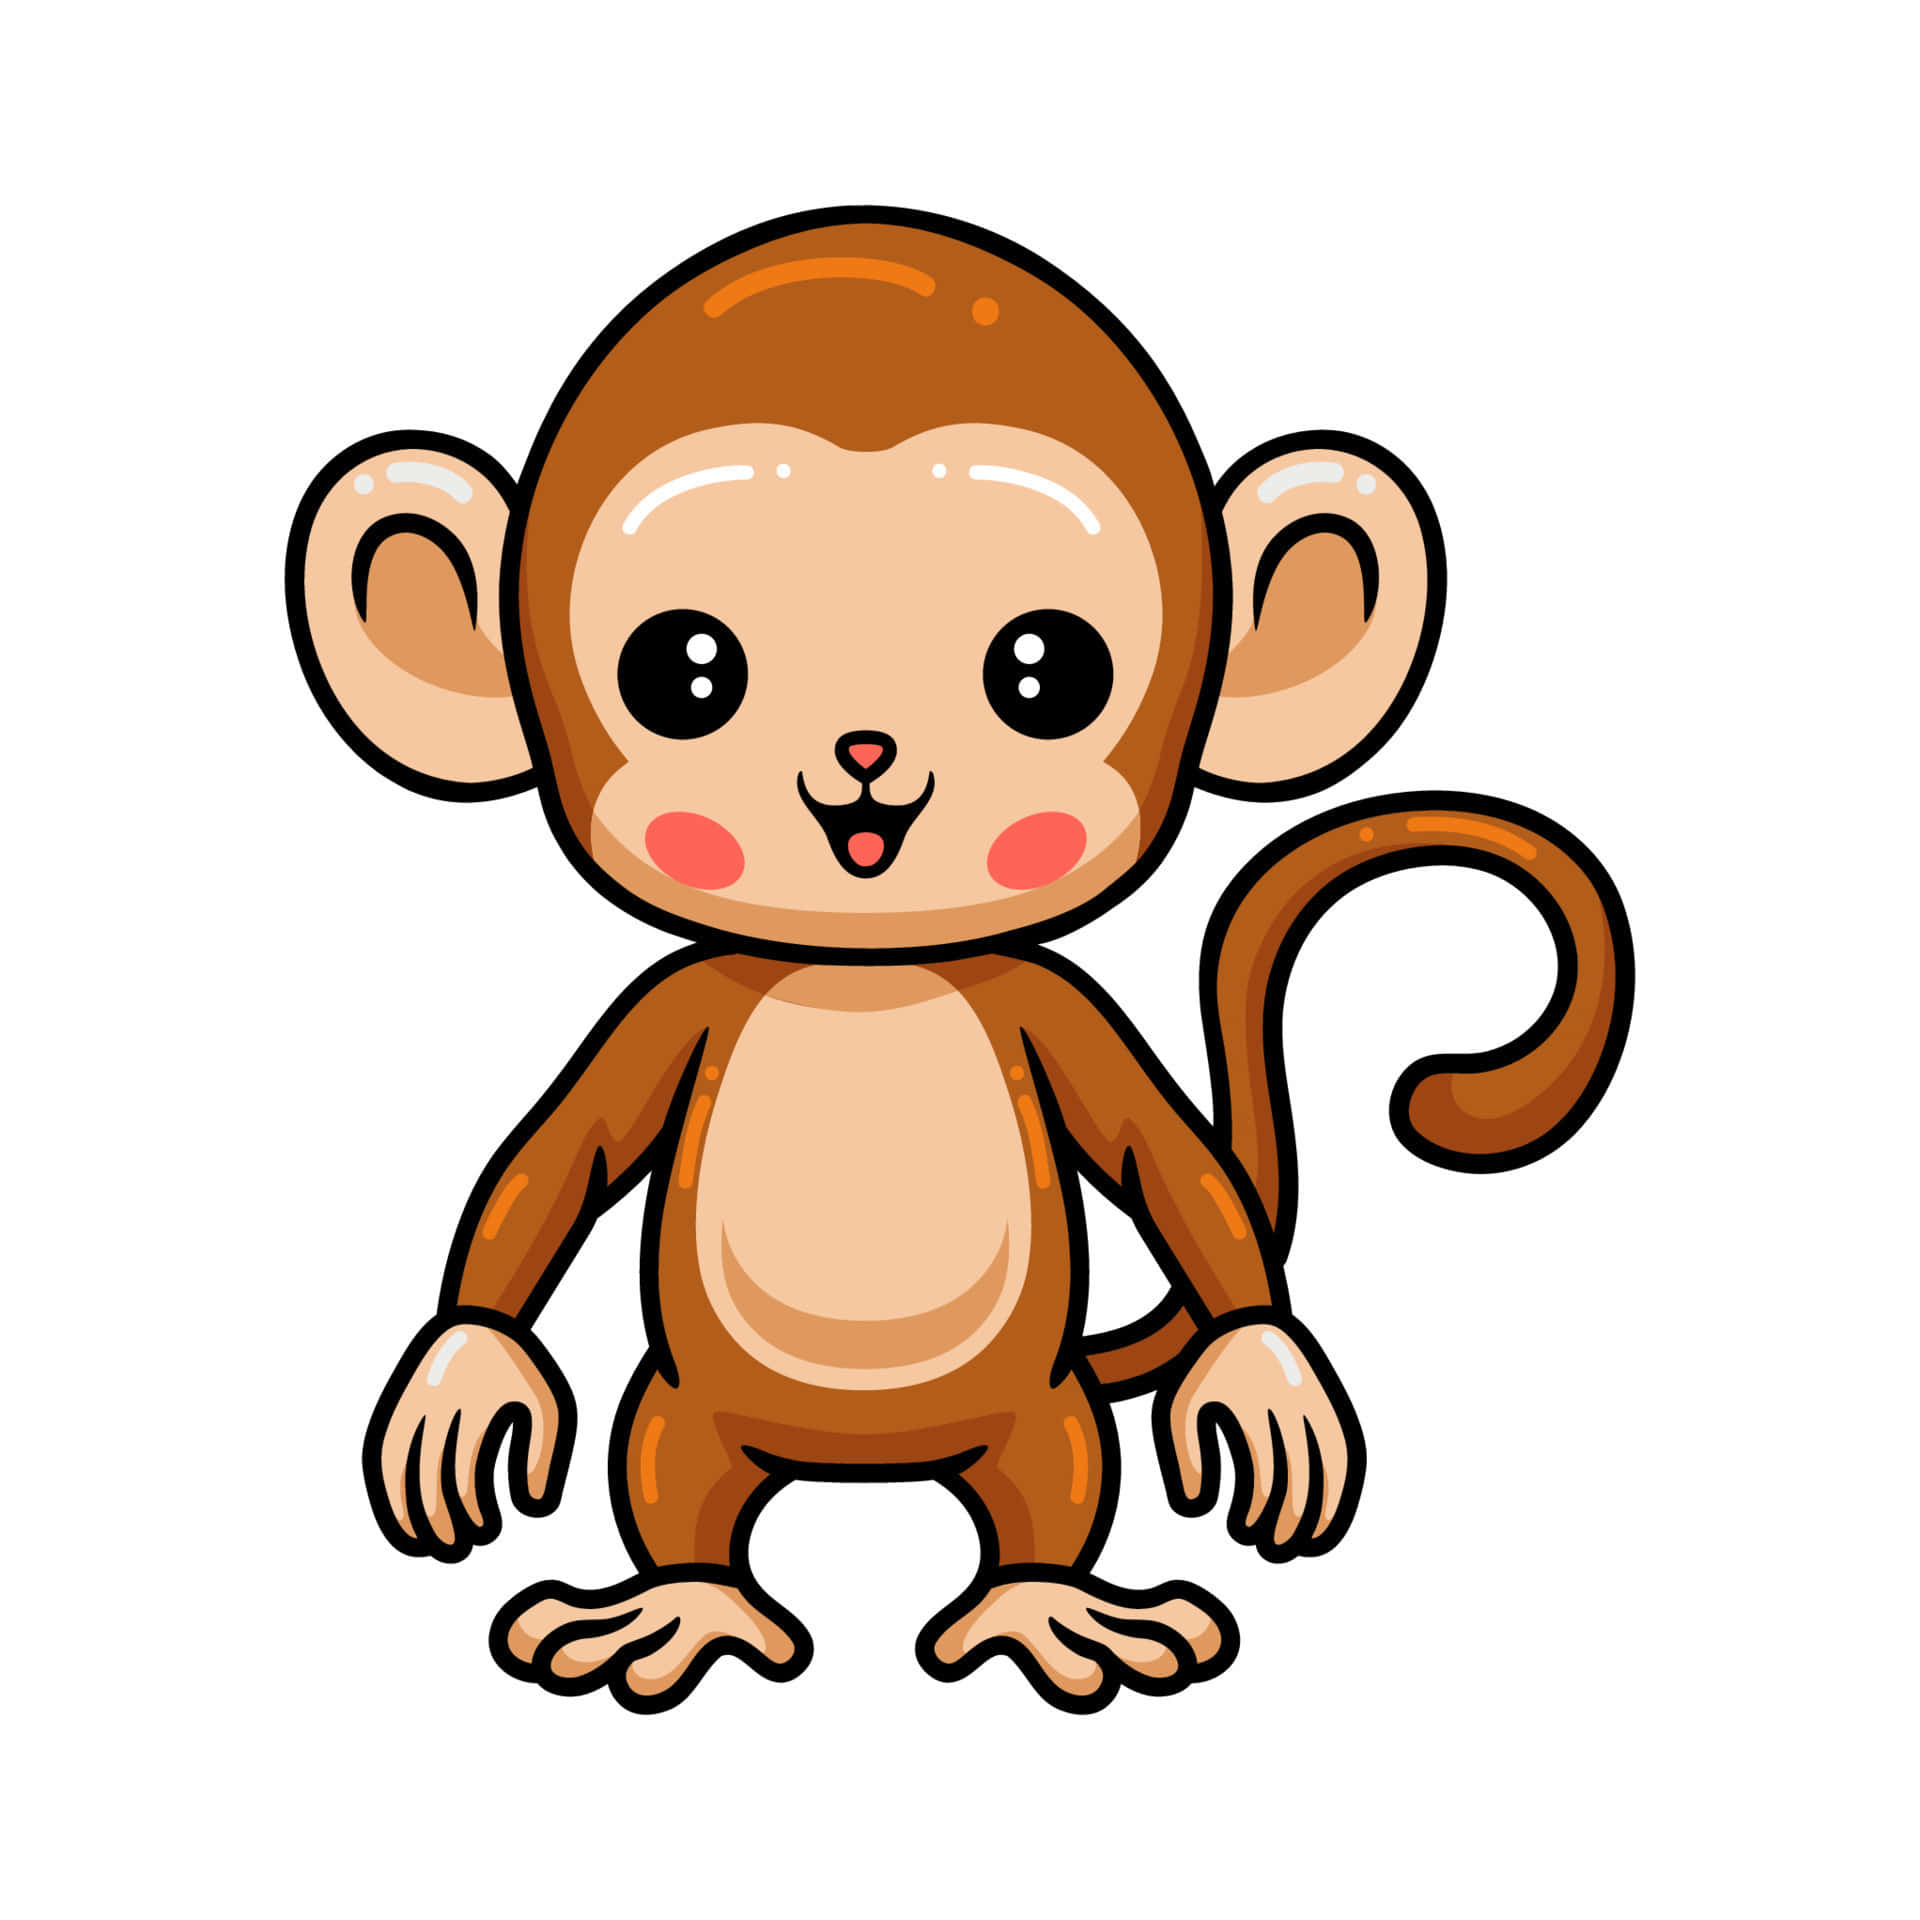 A Cartoon Monkey Standing On A White Background